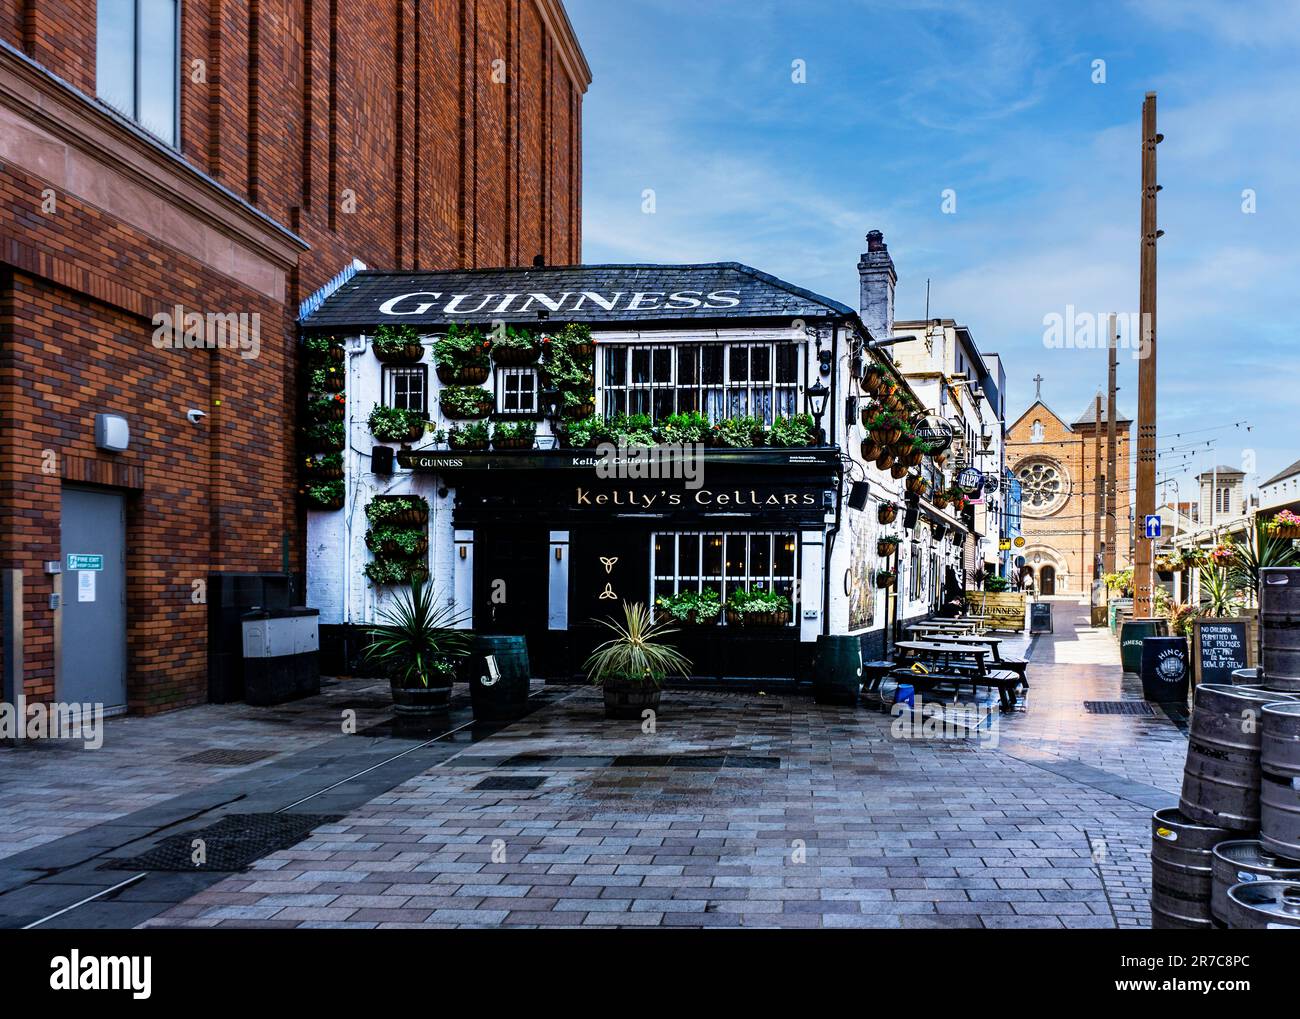 Kelly’s Cellars, Belfast oldest pub describes itself as a bar not a restaurant. Built in 1720 the bar is a  venue for local music and musicians. Stock Photo